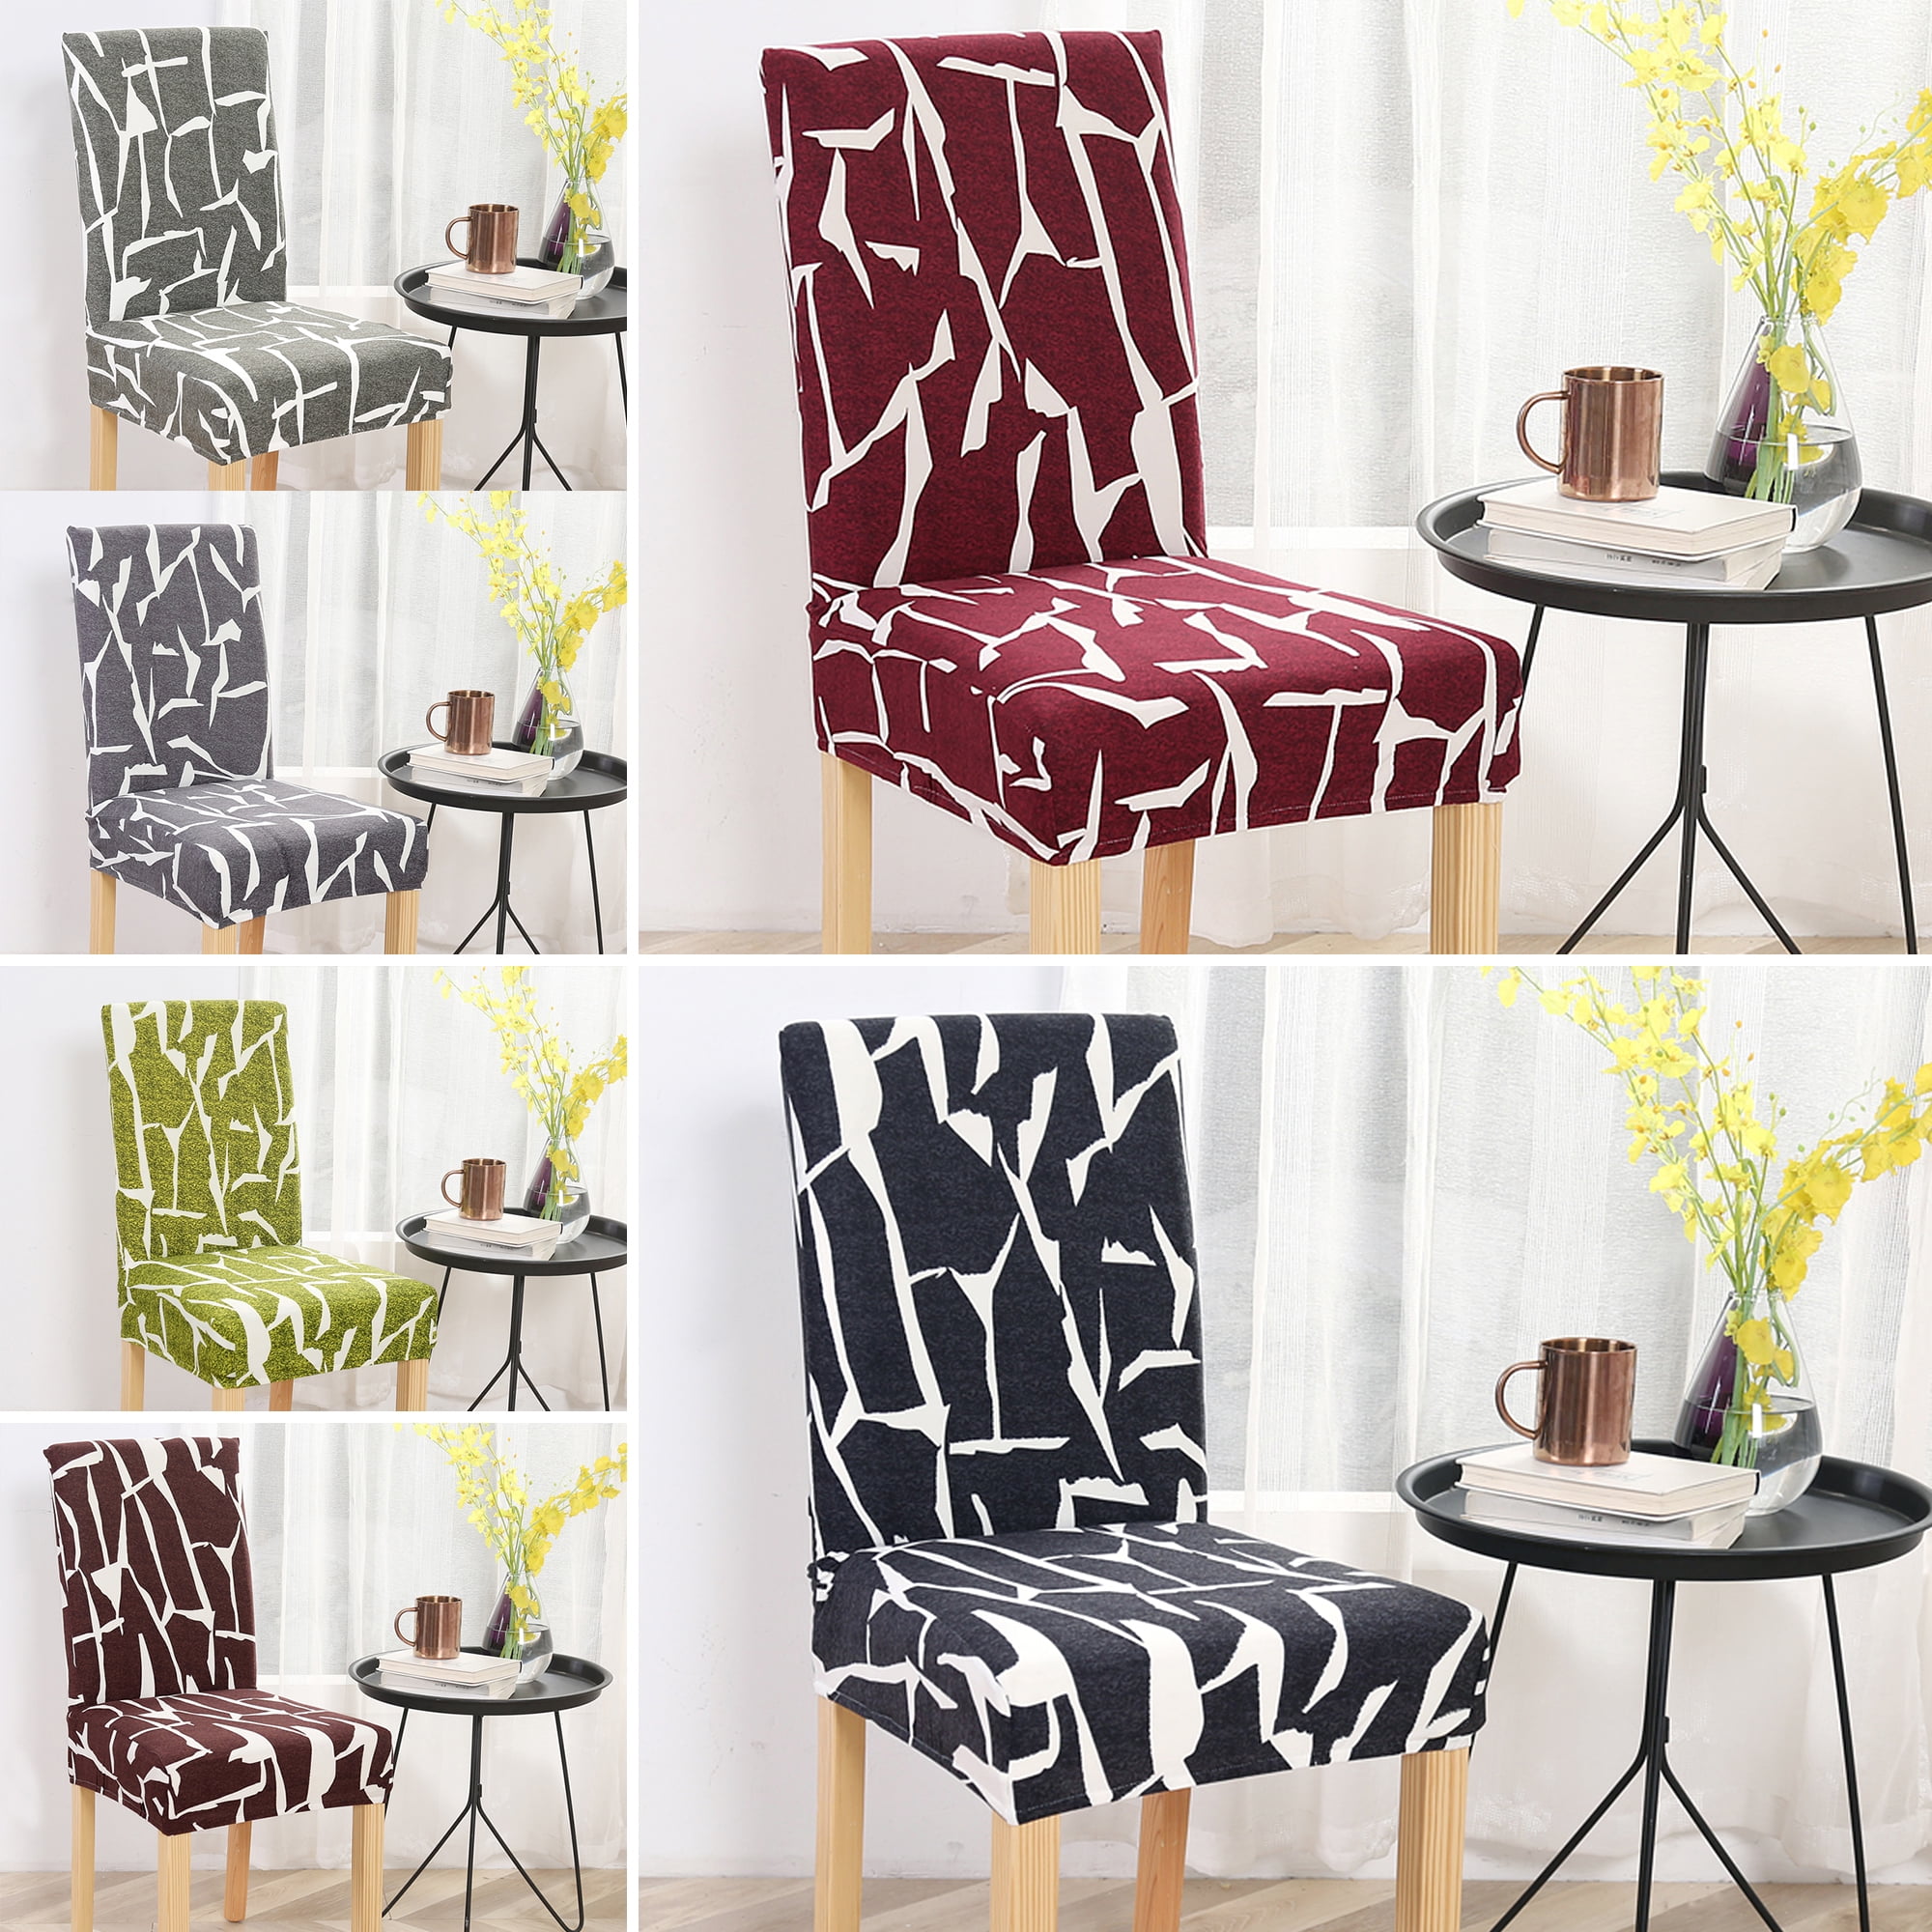 New Elastic Dining Chair Cover Piece Chair Set Stool Set Party Hotel Home Decor 